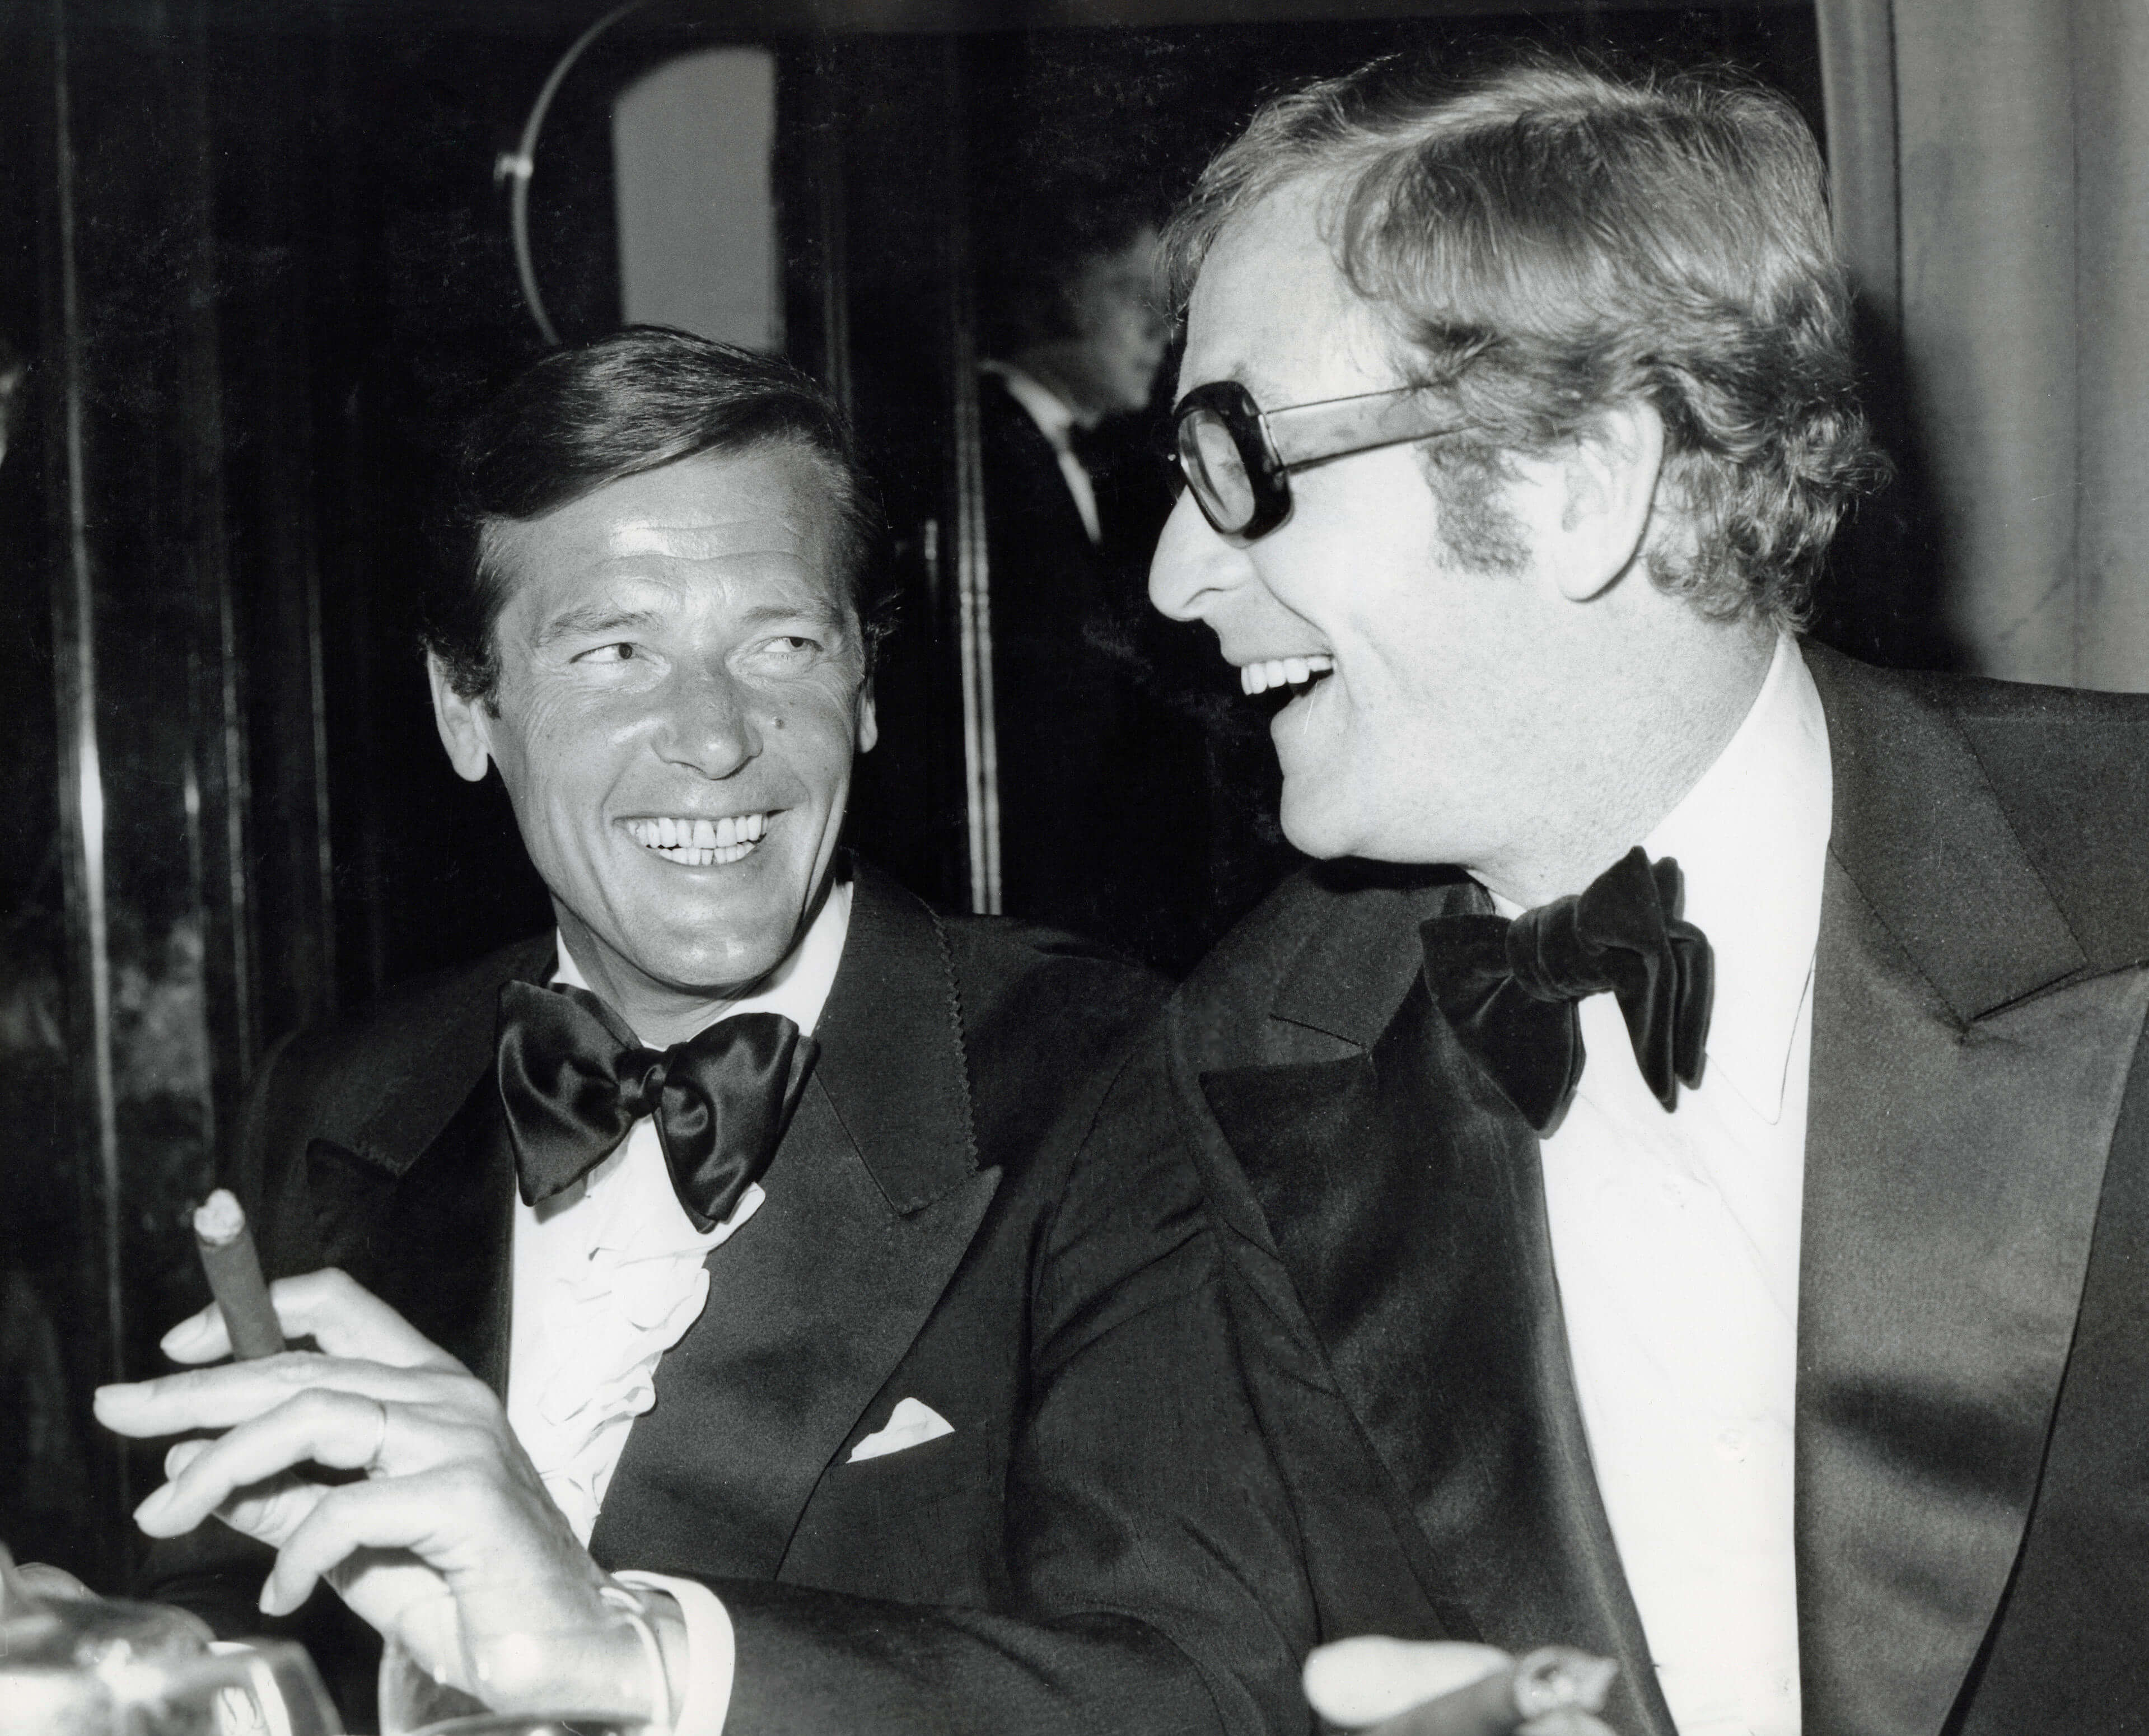 Roger with Michael Caine in 1973. PictureLux / The Hollywood Archive / Alamy Stock Photo.